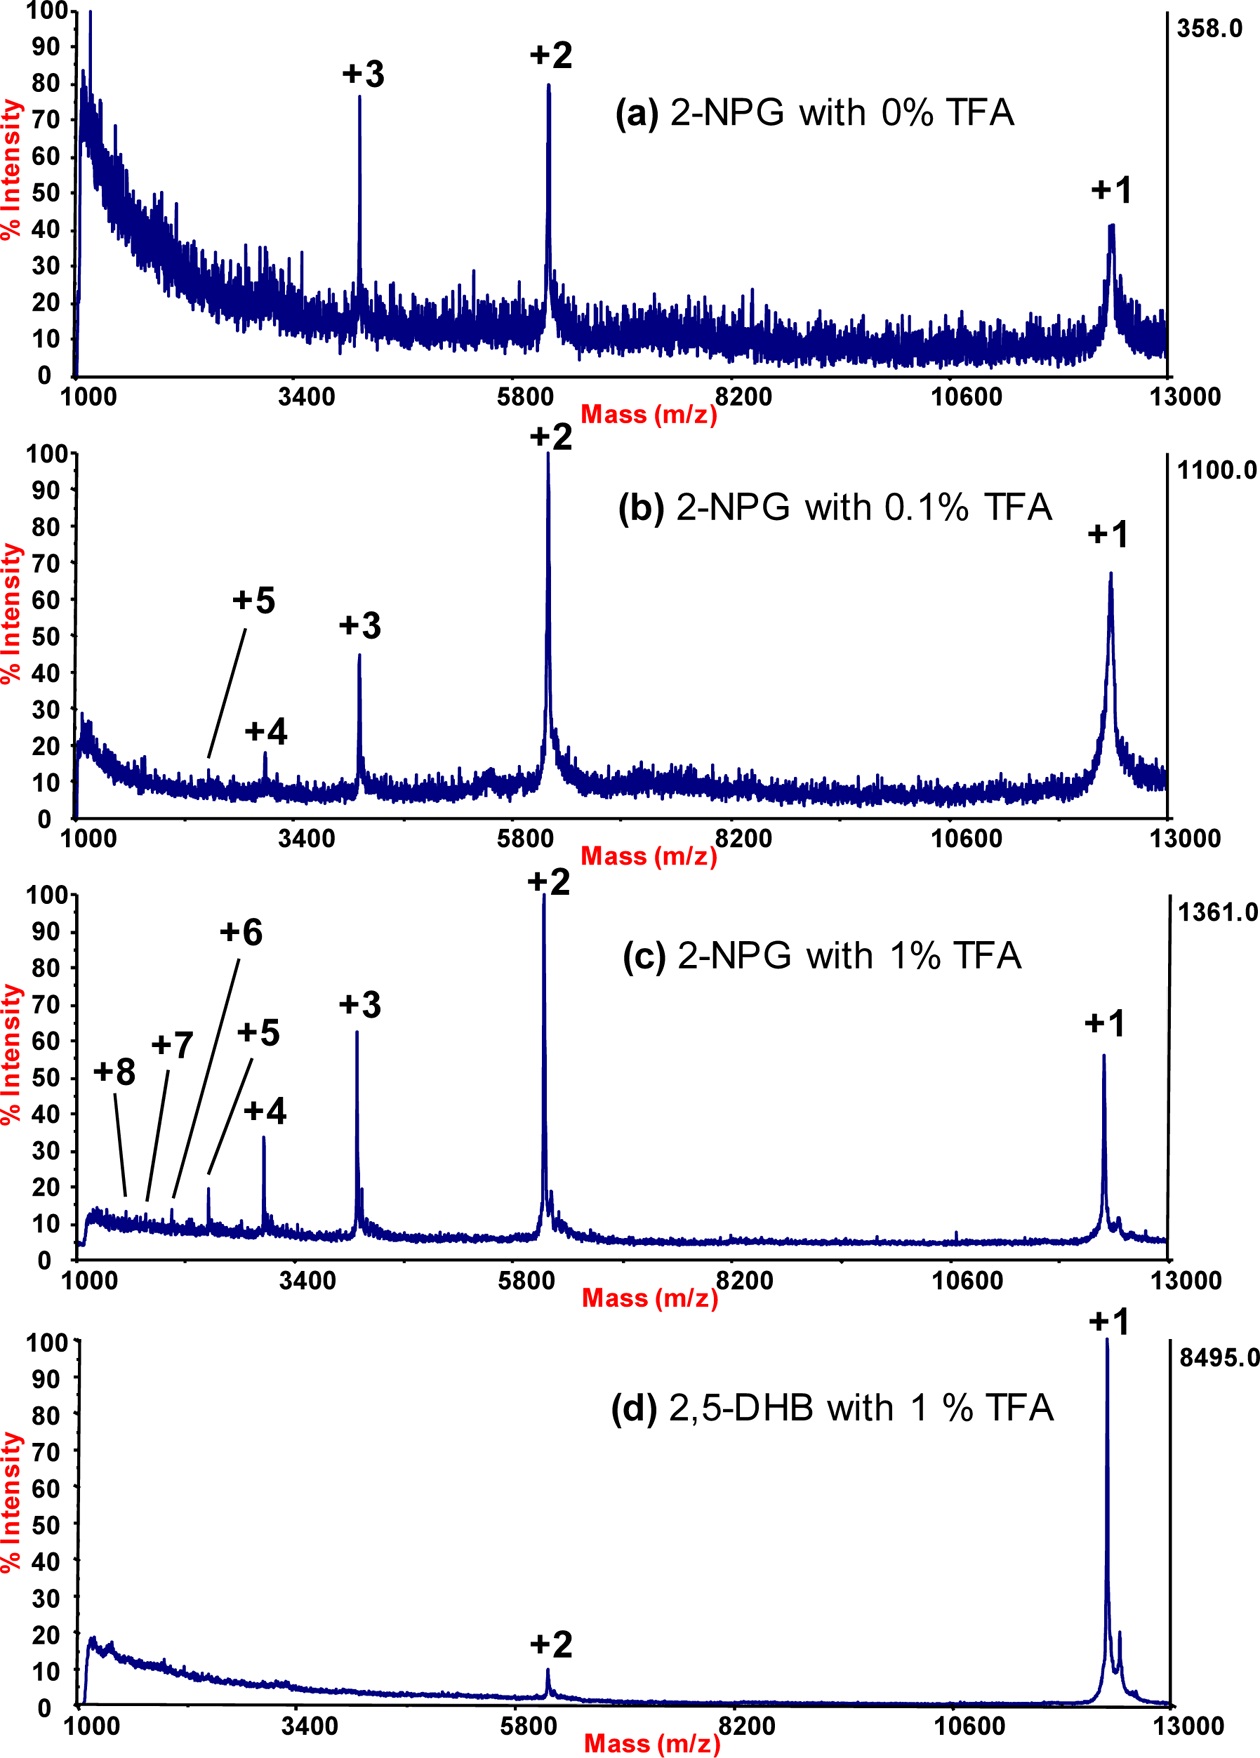 MALDI mass spectra of cytochrome c using (a) 2-NPG in 50% ACN, (b) 2-NPG in 50%ACN/0.1% TFA, (c) 2-NPG in 50% ACN/1% TFA, and (d) 2,5-DHB matrix in 50% ACN/1% TFA. Charge state of each protein peak is labeled.